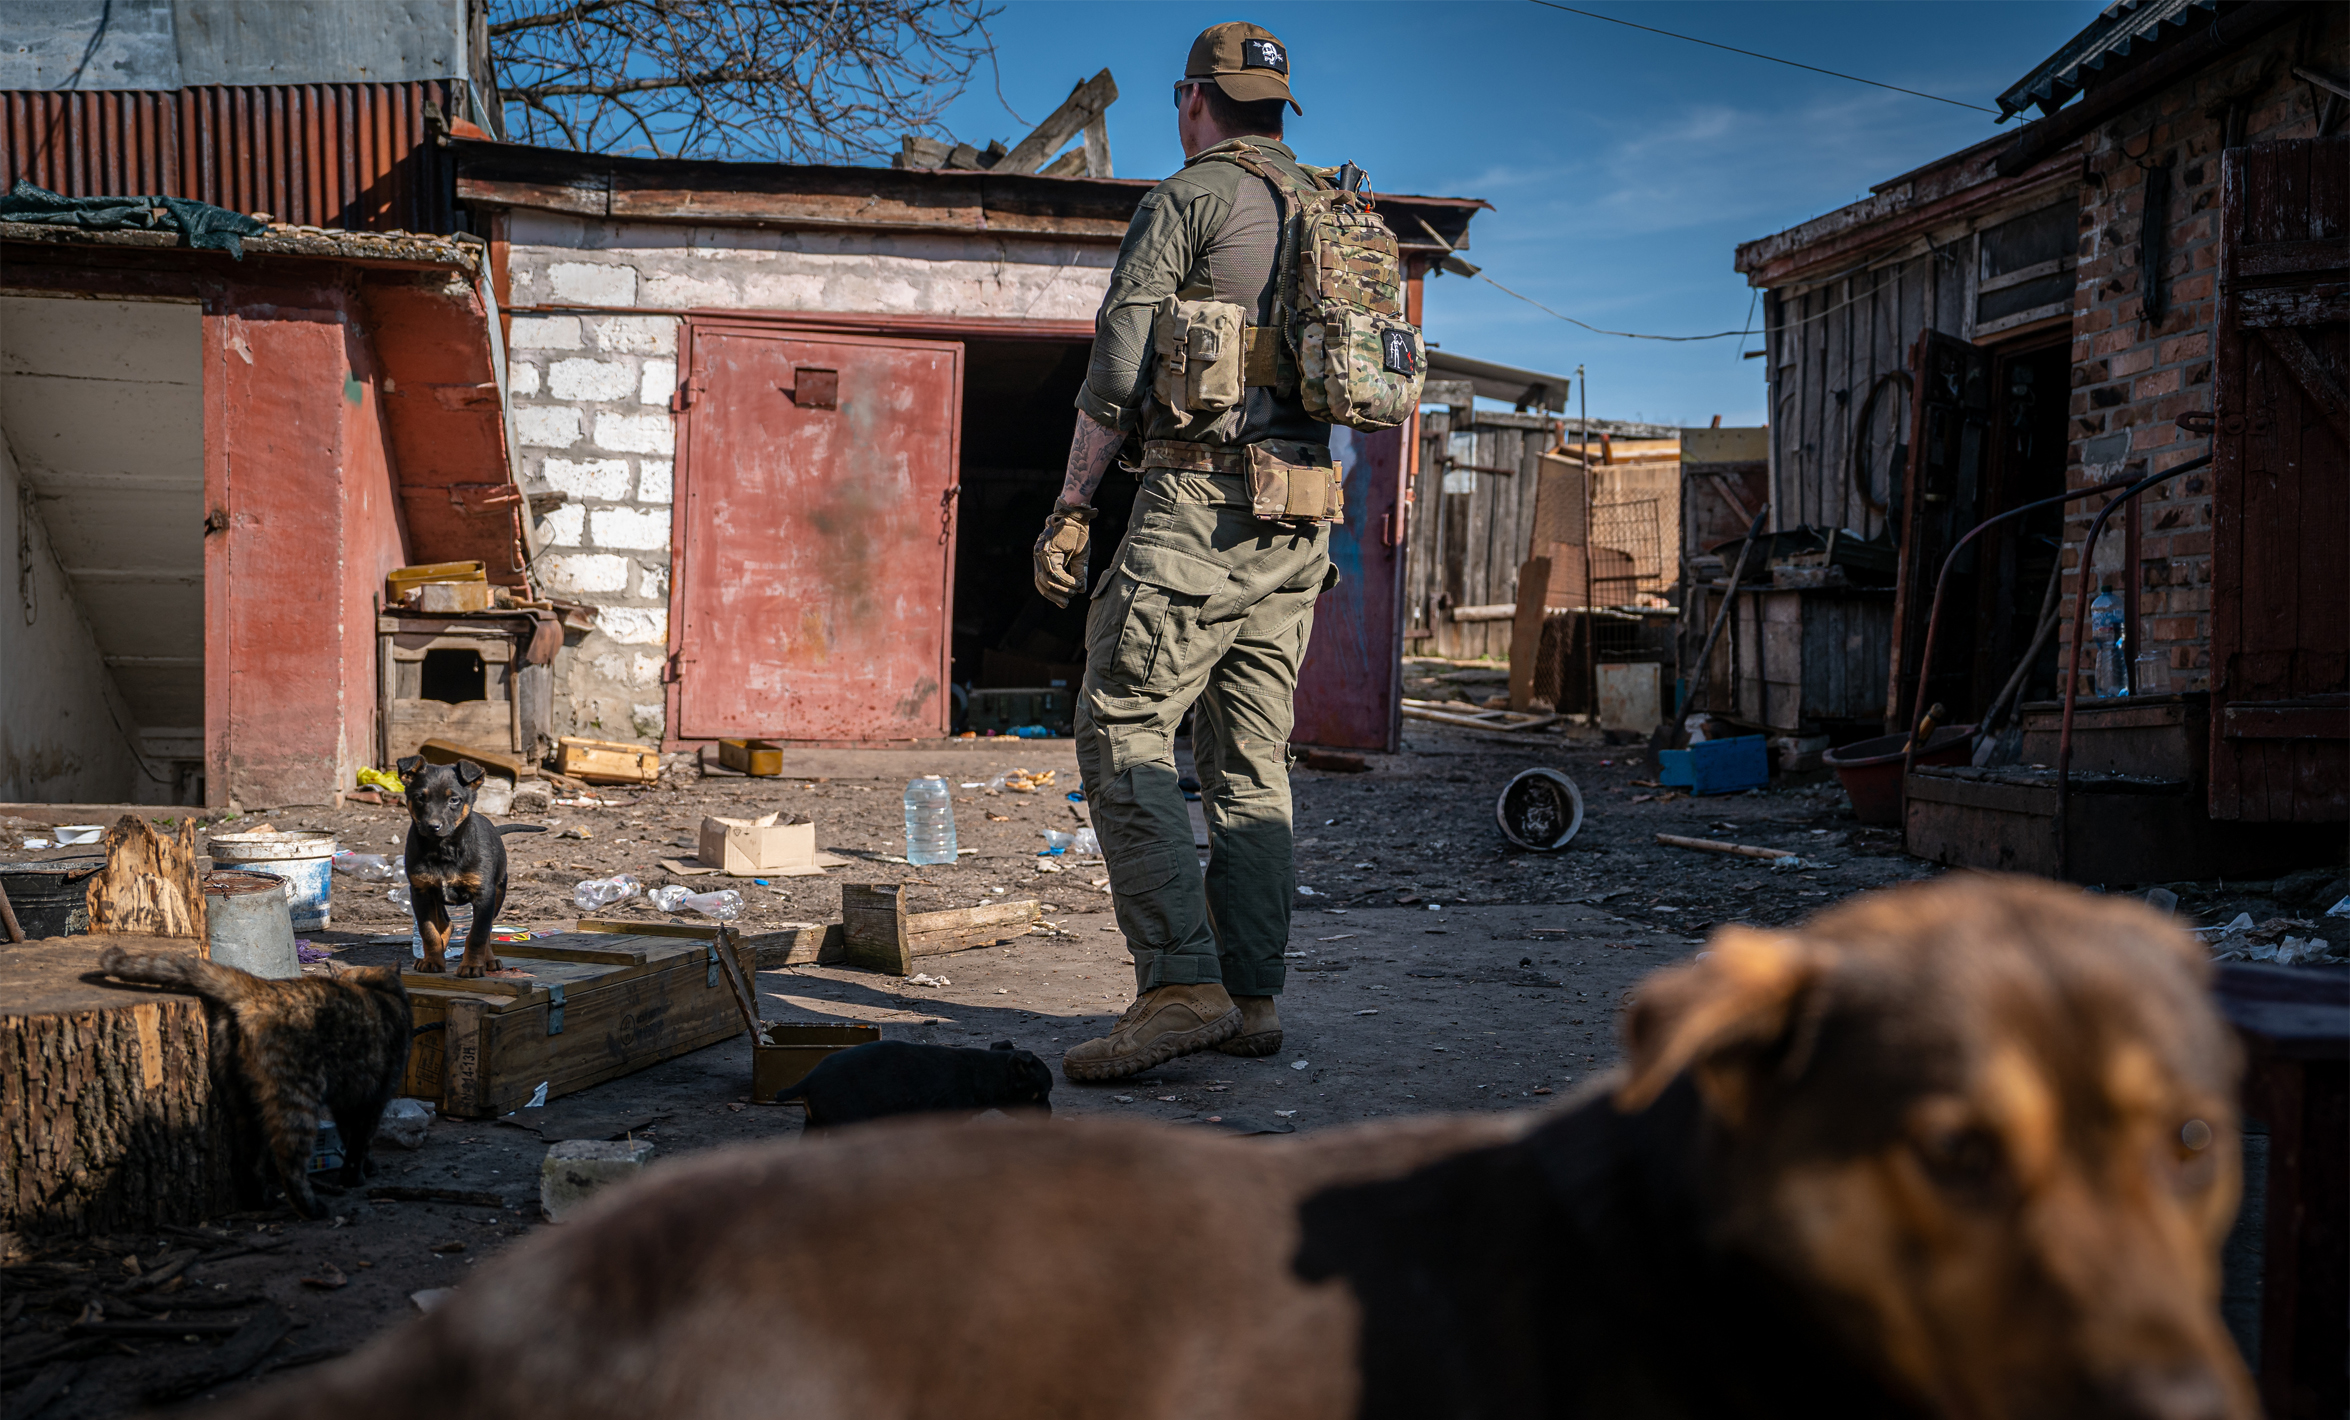 A volunteer inspects an abandoned house in a village near the Donetsk frontline as Russian-Ukrainian war continues, in Yurkivka, Ukraine on March 23, 2023. Photo by Ignacio Marin/Anadolu Agency via Getty Images.